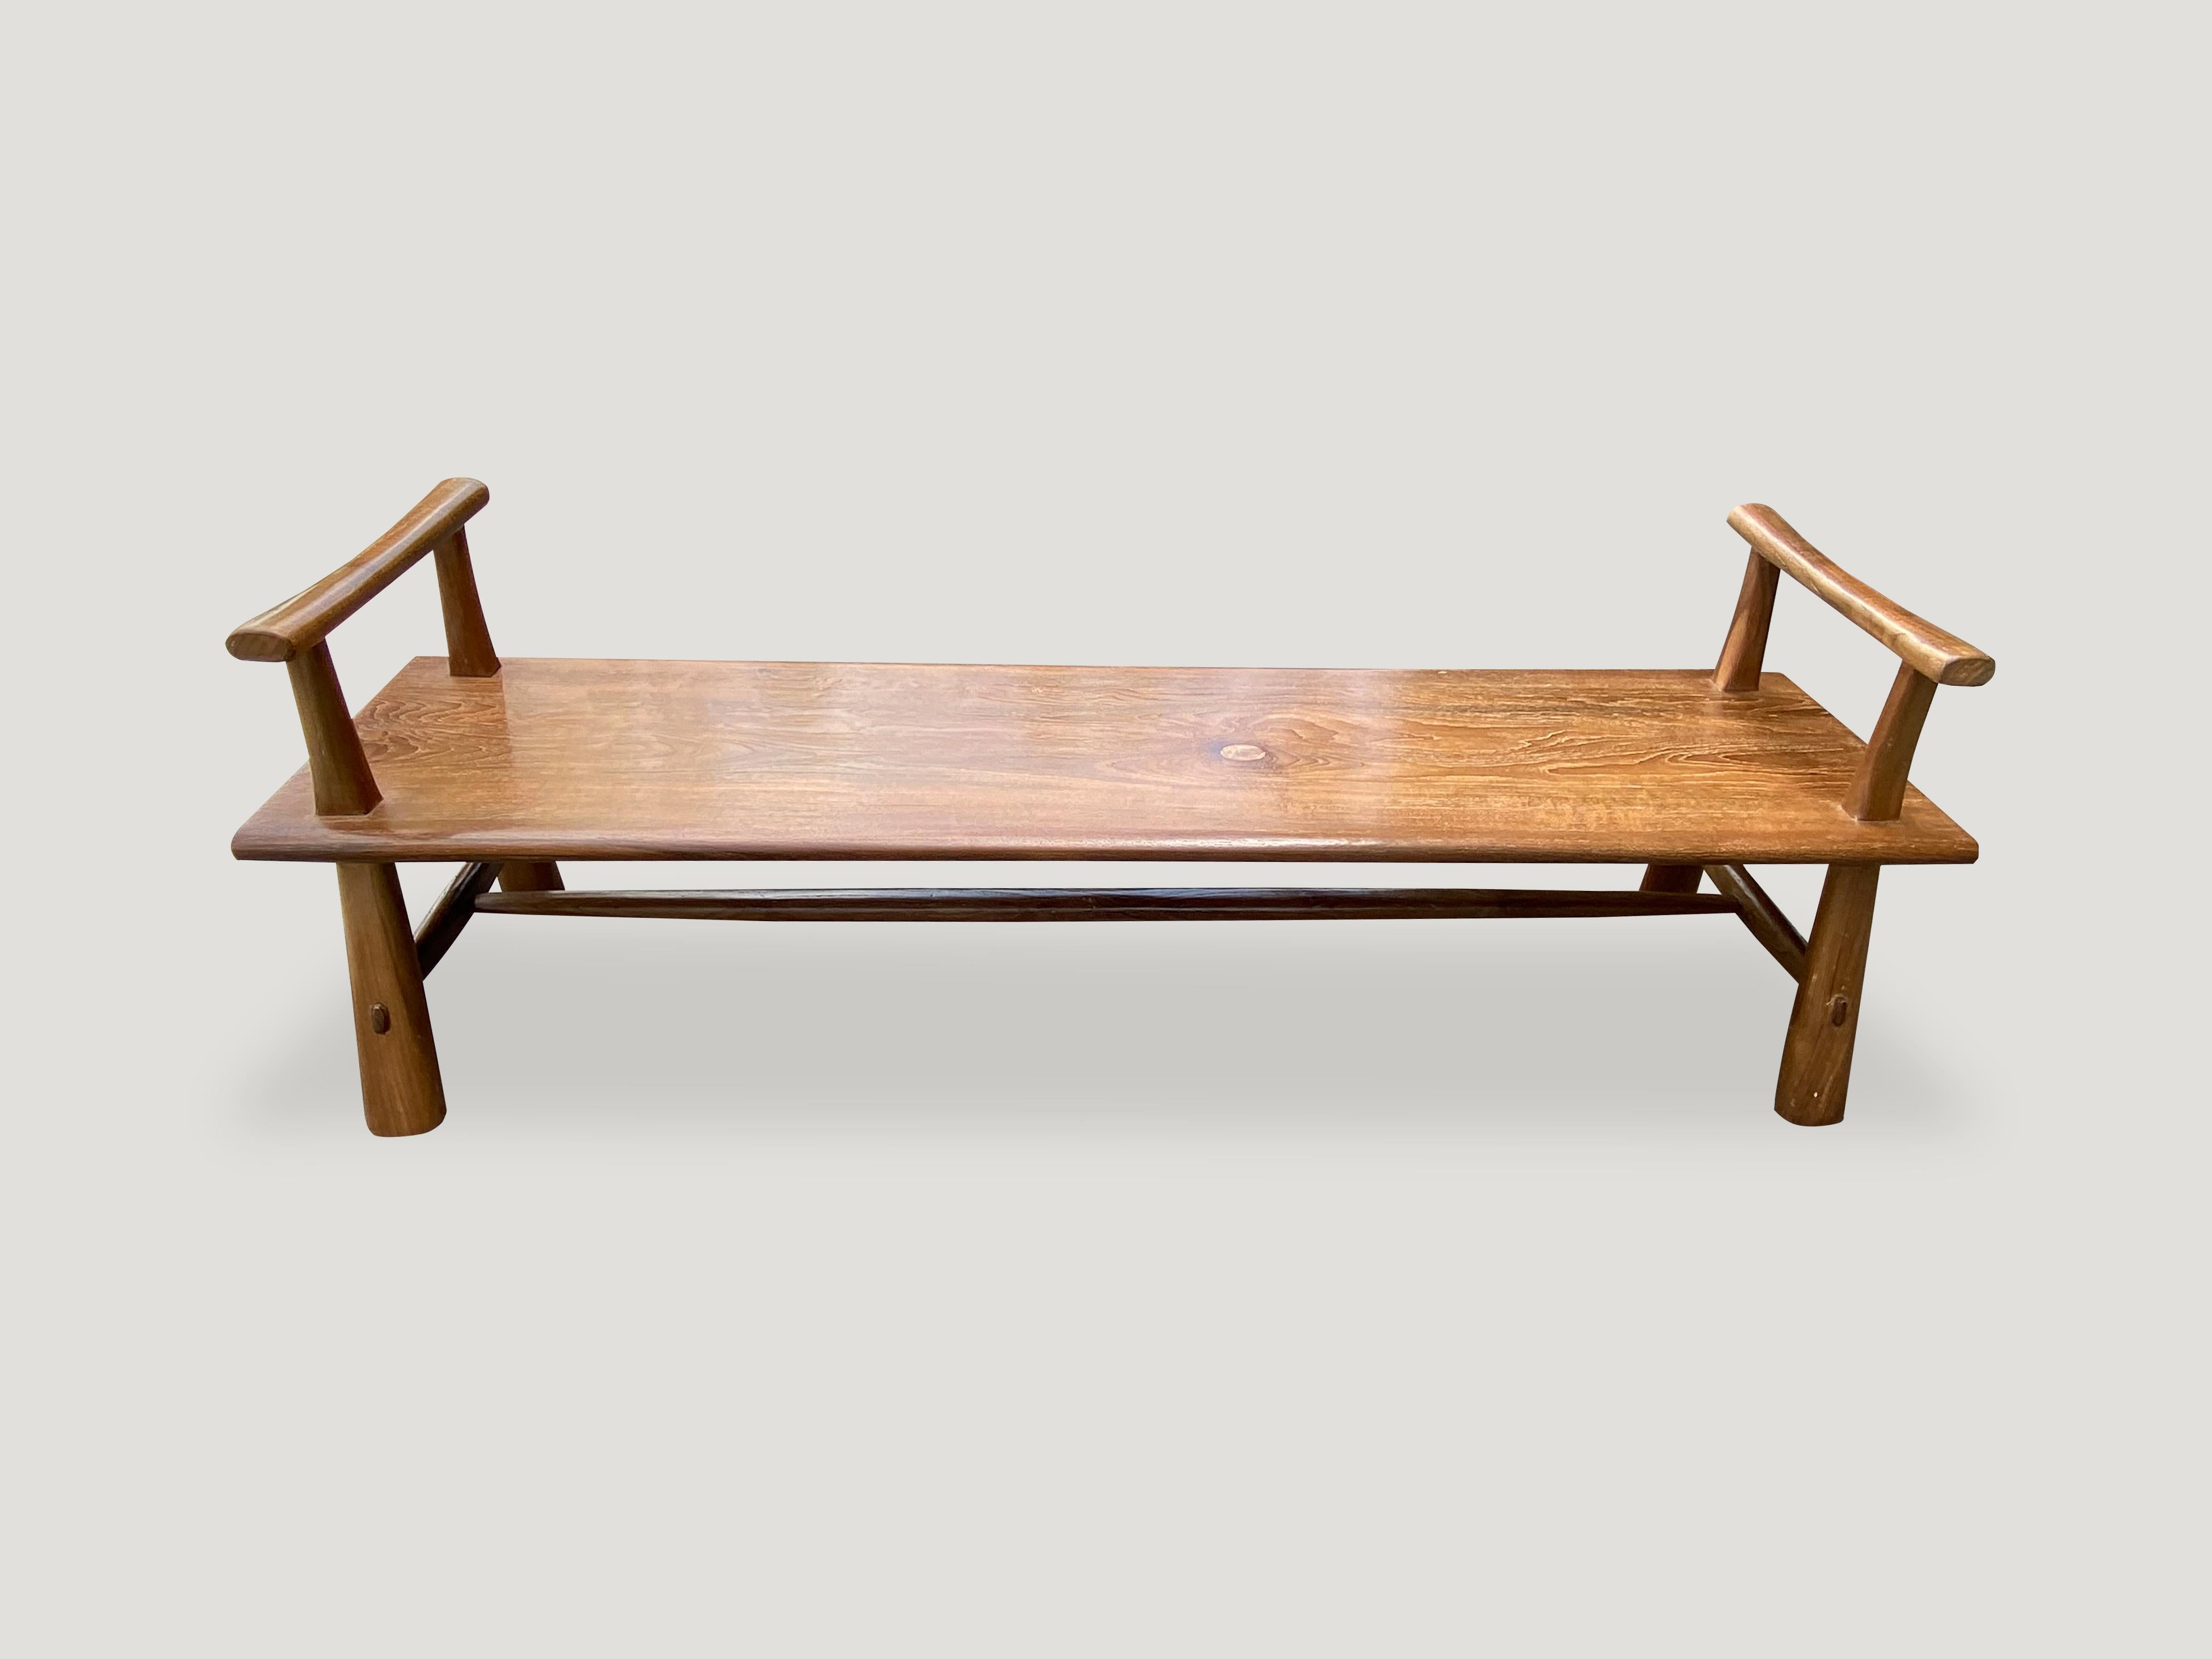 Andrianna Shamaris Midcentury Couture Teak Wood Bench with Arms In Excellent Condition For Sale In New York, NY